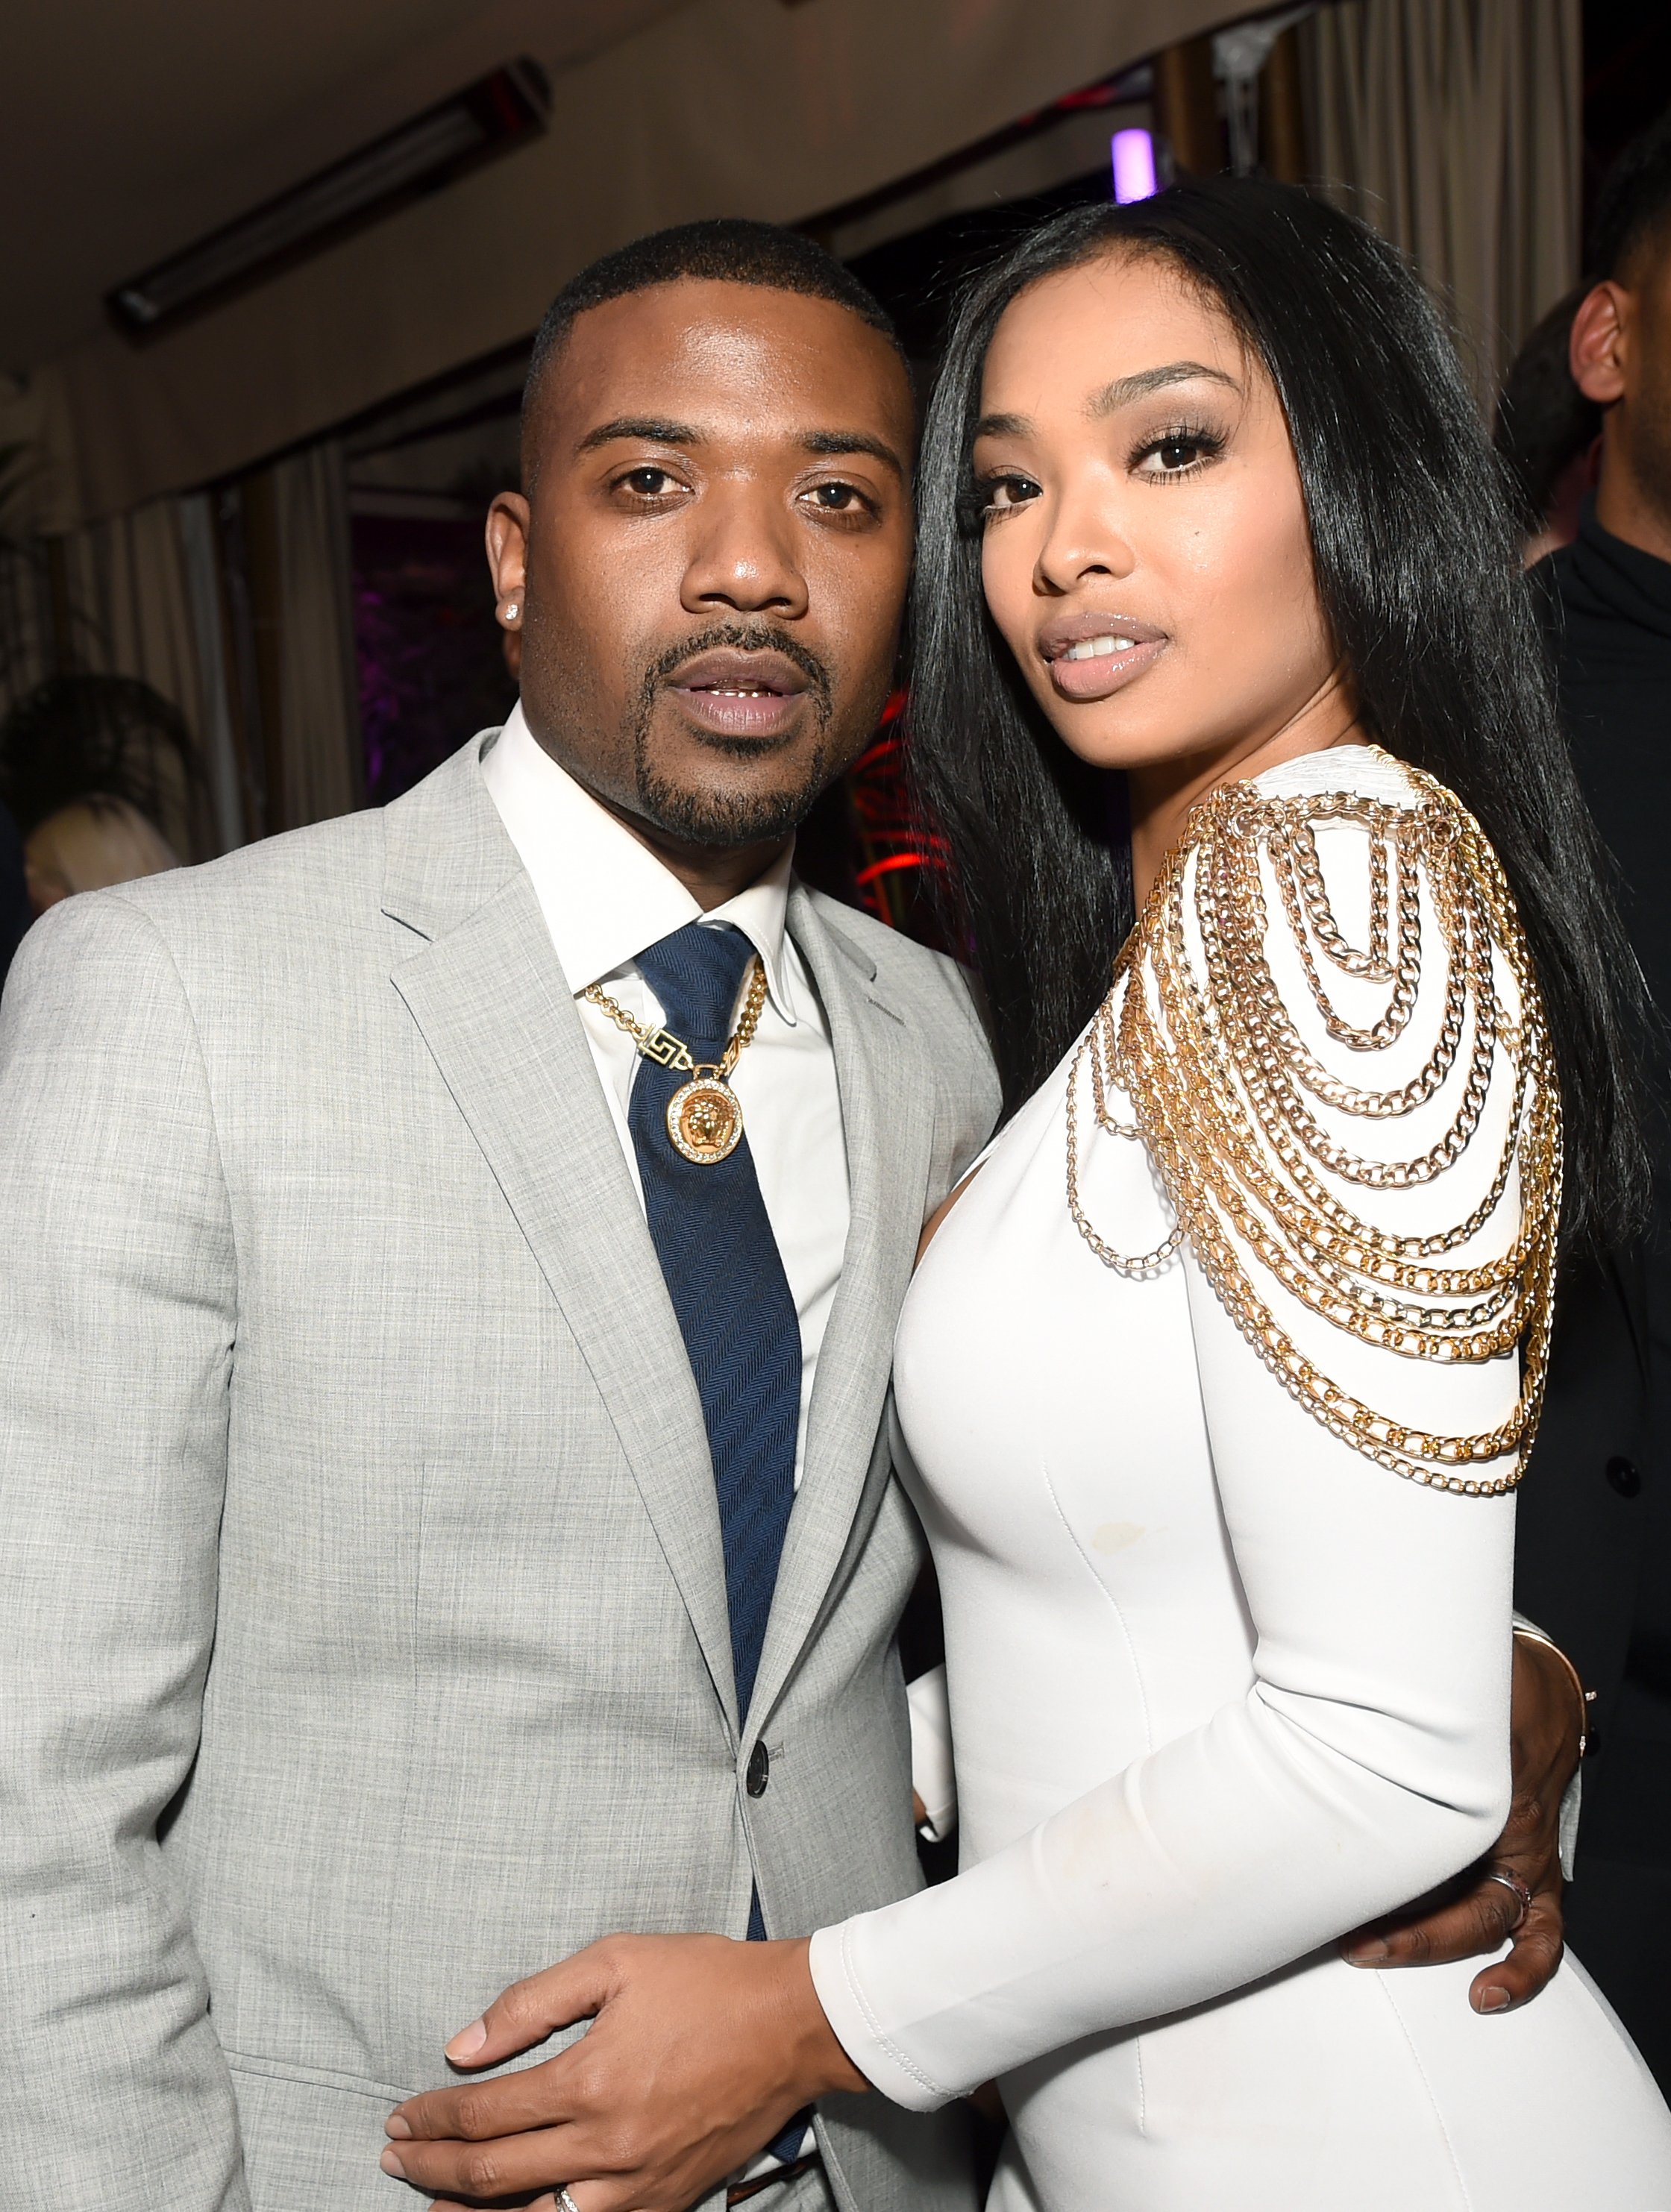 Ray J and wife Princess Love attend a GQ Magazine-sponsored Grammy event in February 2017 in Hollywood, California. | Source: Getty Images